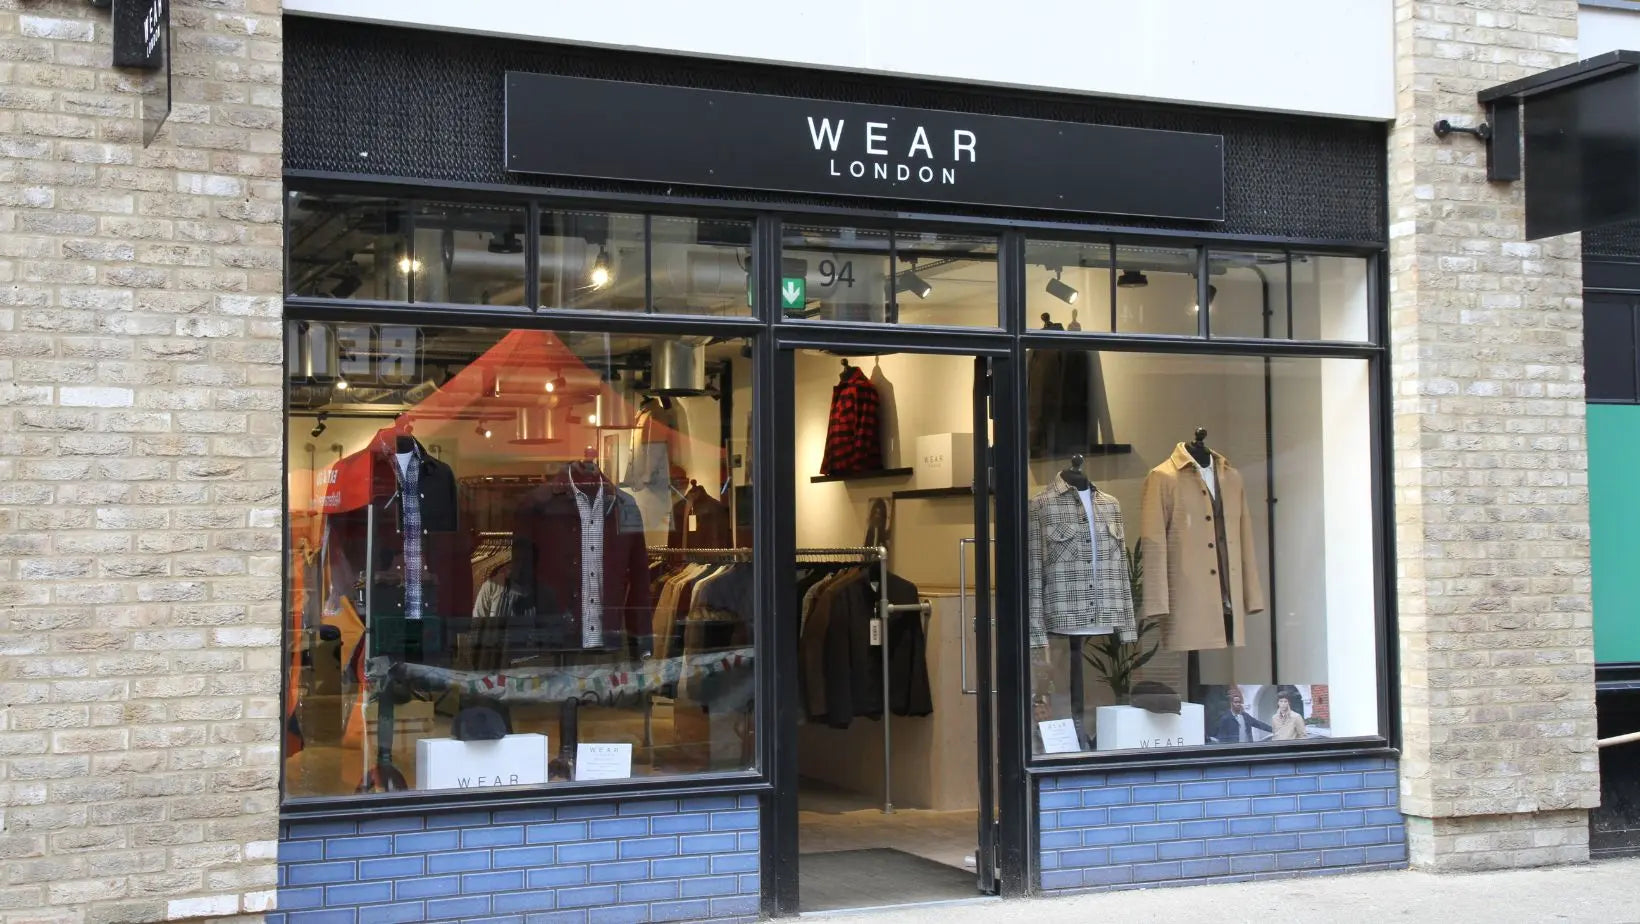 Our New Store - The future in Berwick Street, Soho